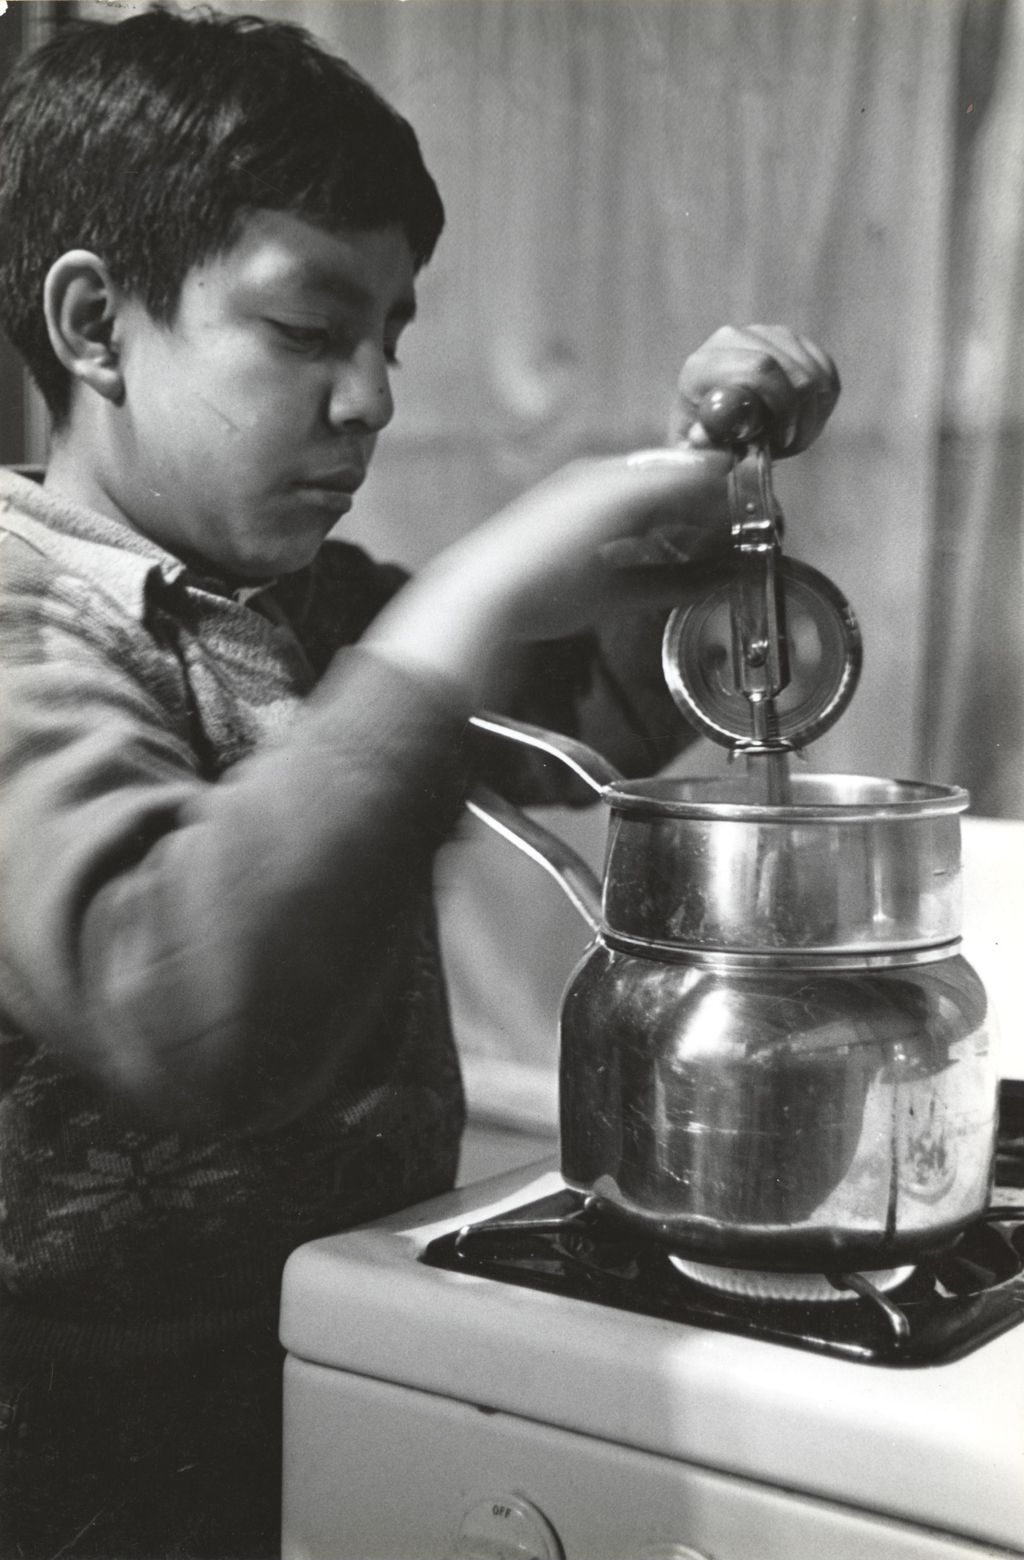 Miniature of Boy with hand mixer at stove in cooking class